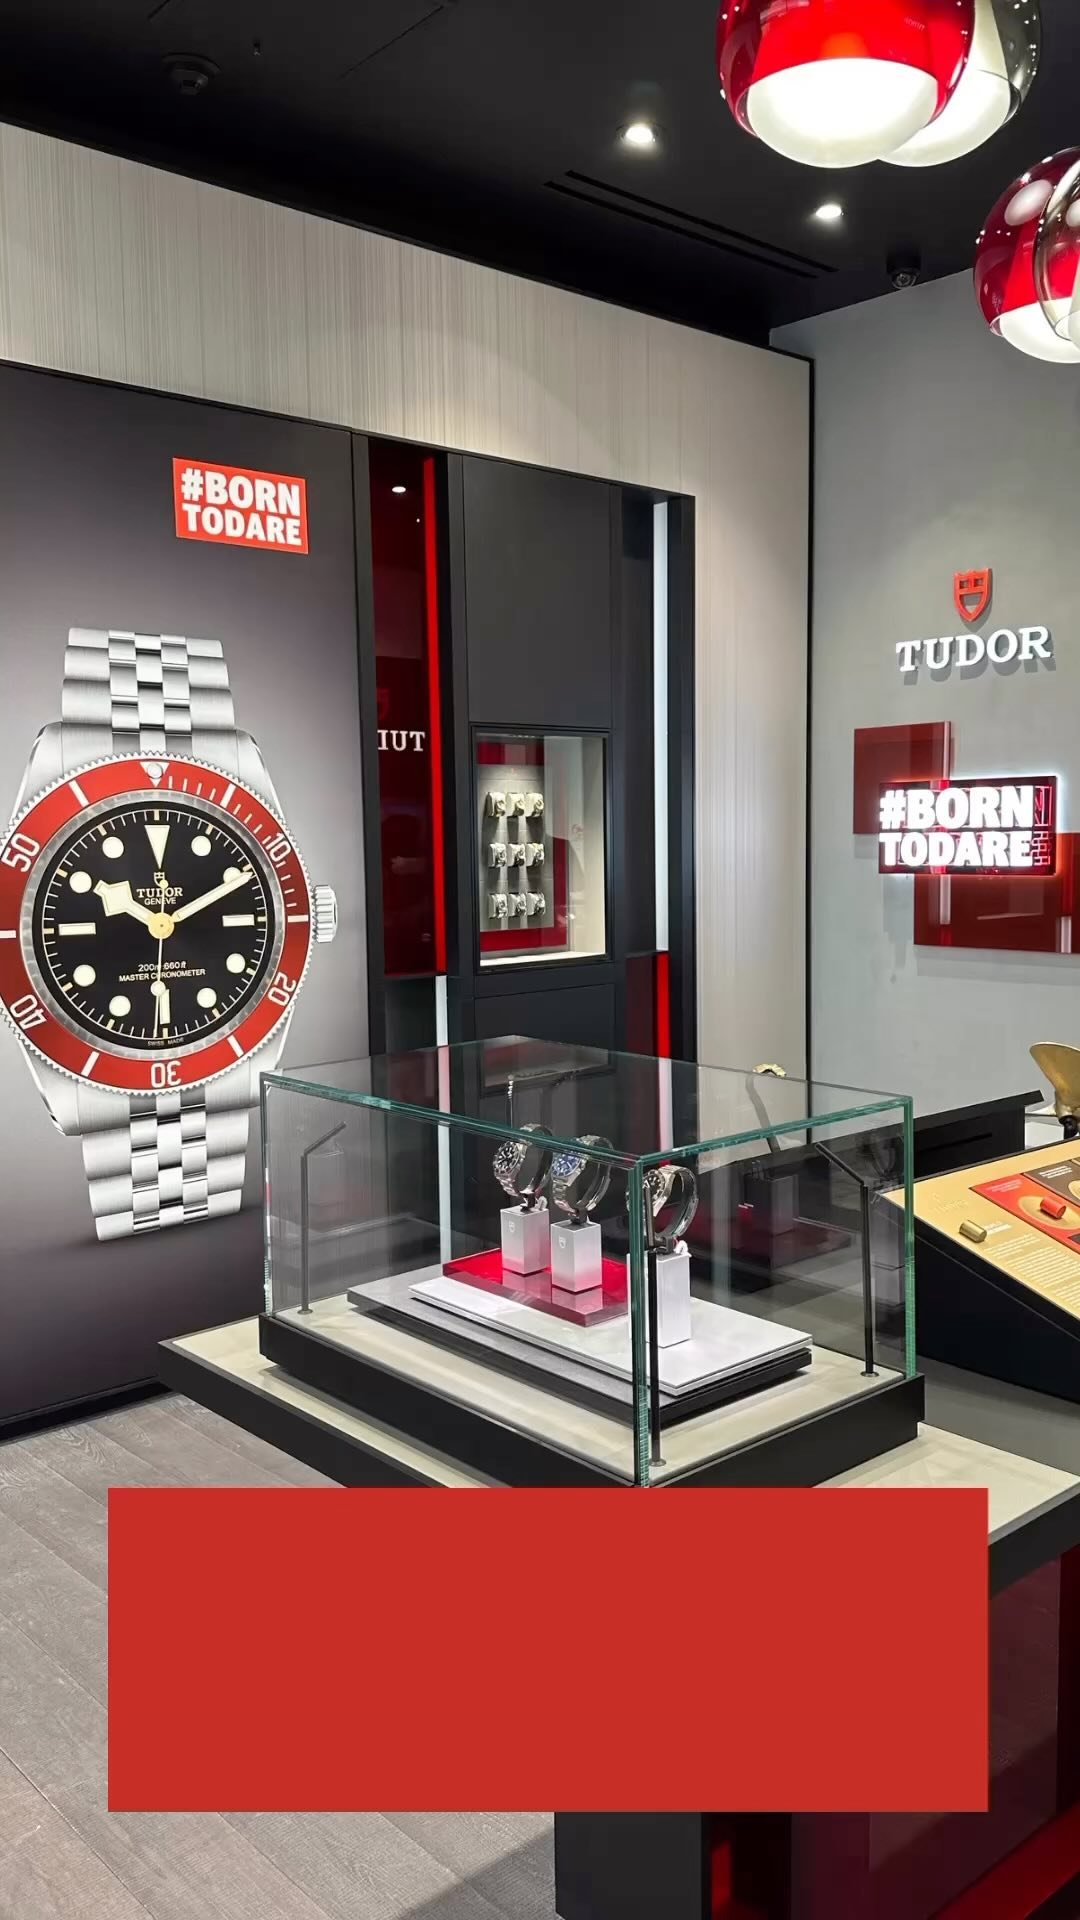 From our friends at @hydepark_jewelers comes TUDOR Watches. A new boutique offering the legendary brand from the makers of Rolex, @tudorwatch is rich in maritime history and unmatched in modern durability.  Visit TUDOR today to try on the boutique-exclusive Black Bay 58 Bronze. Give him a gift he’ll cherish for a lifetime.